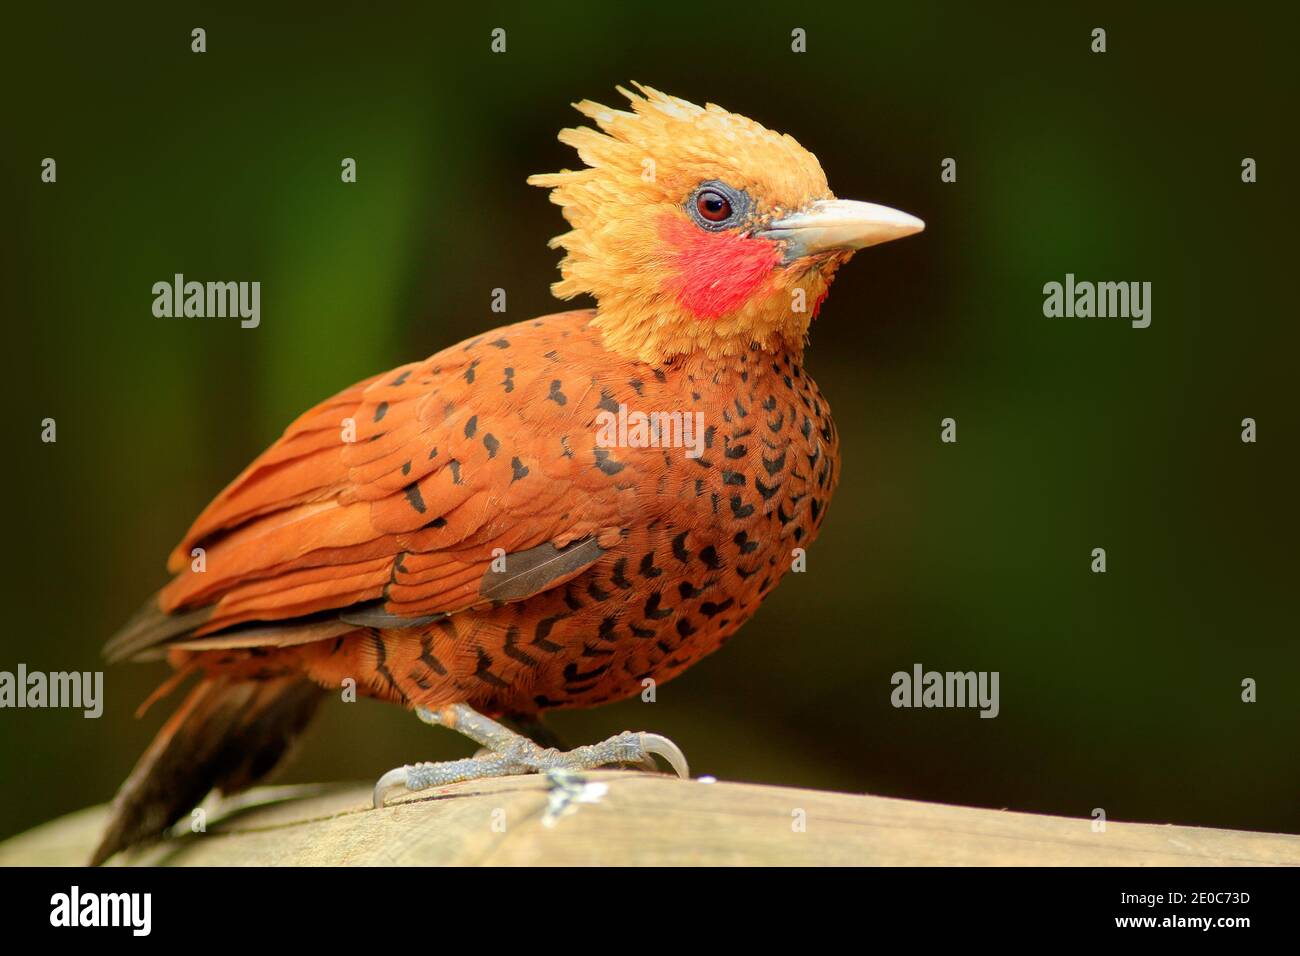 Chestnut-coloured Woodpecker, Celeus castaneus, brawn bird with red face from Costa Rica. Woodpecker with yellow crest and red face, sitting on tree. Stock Photo